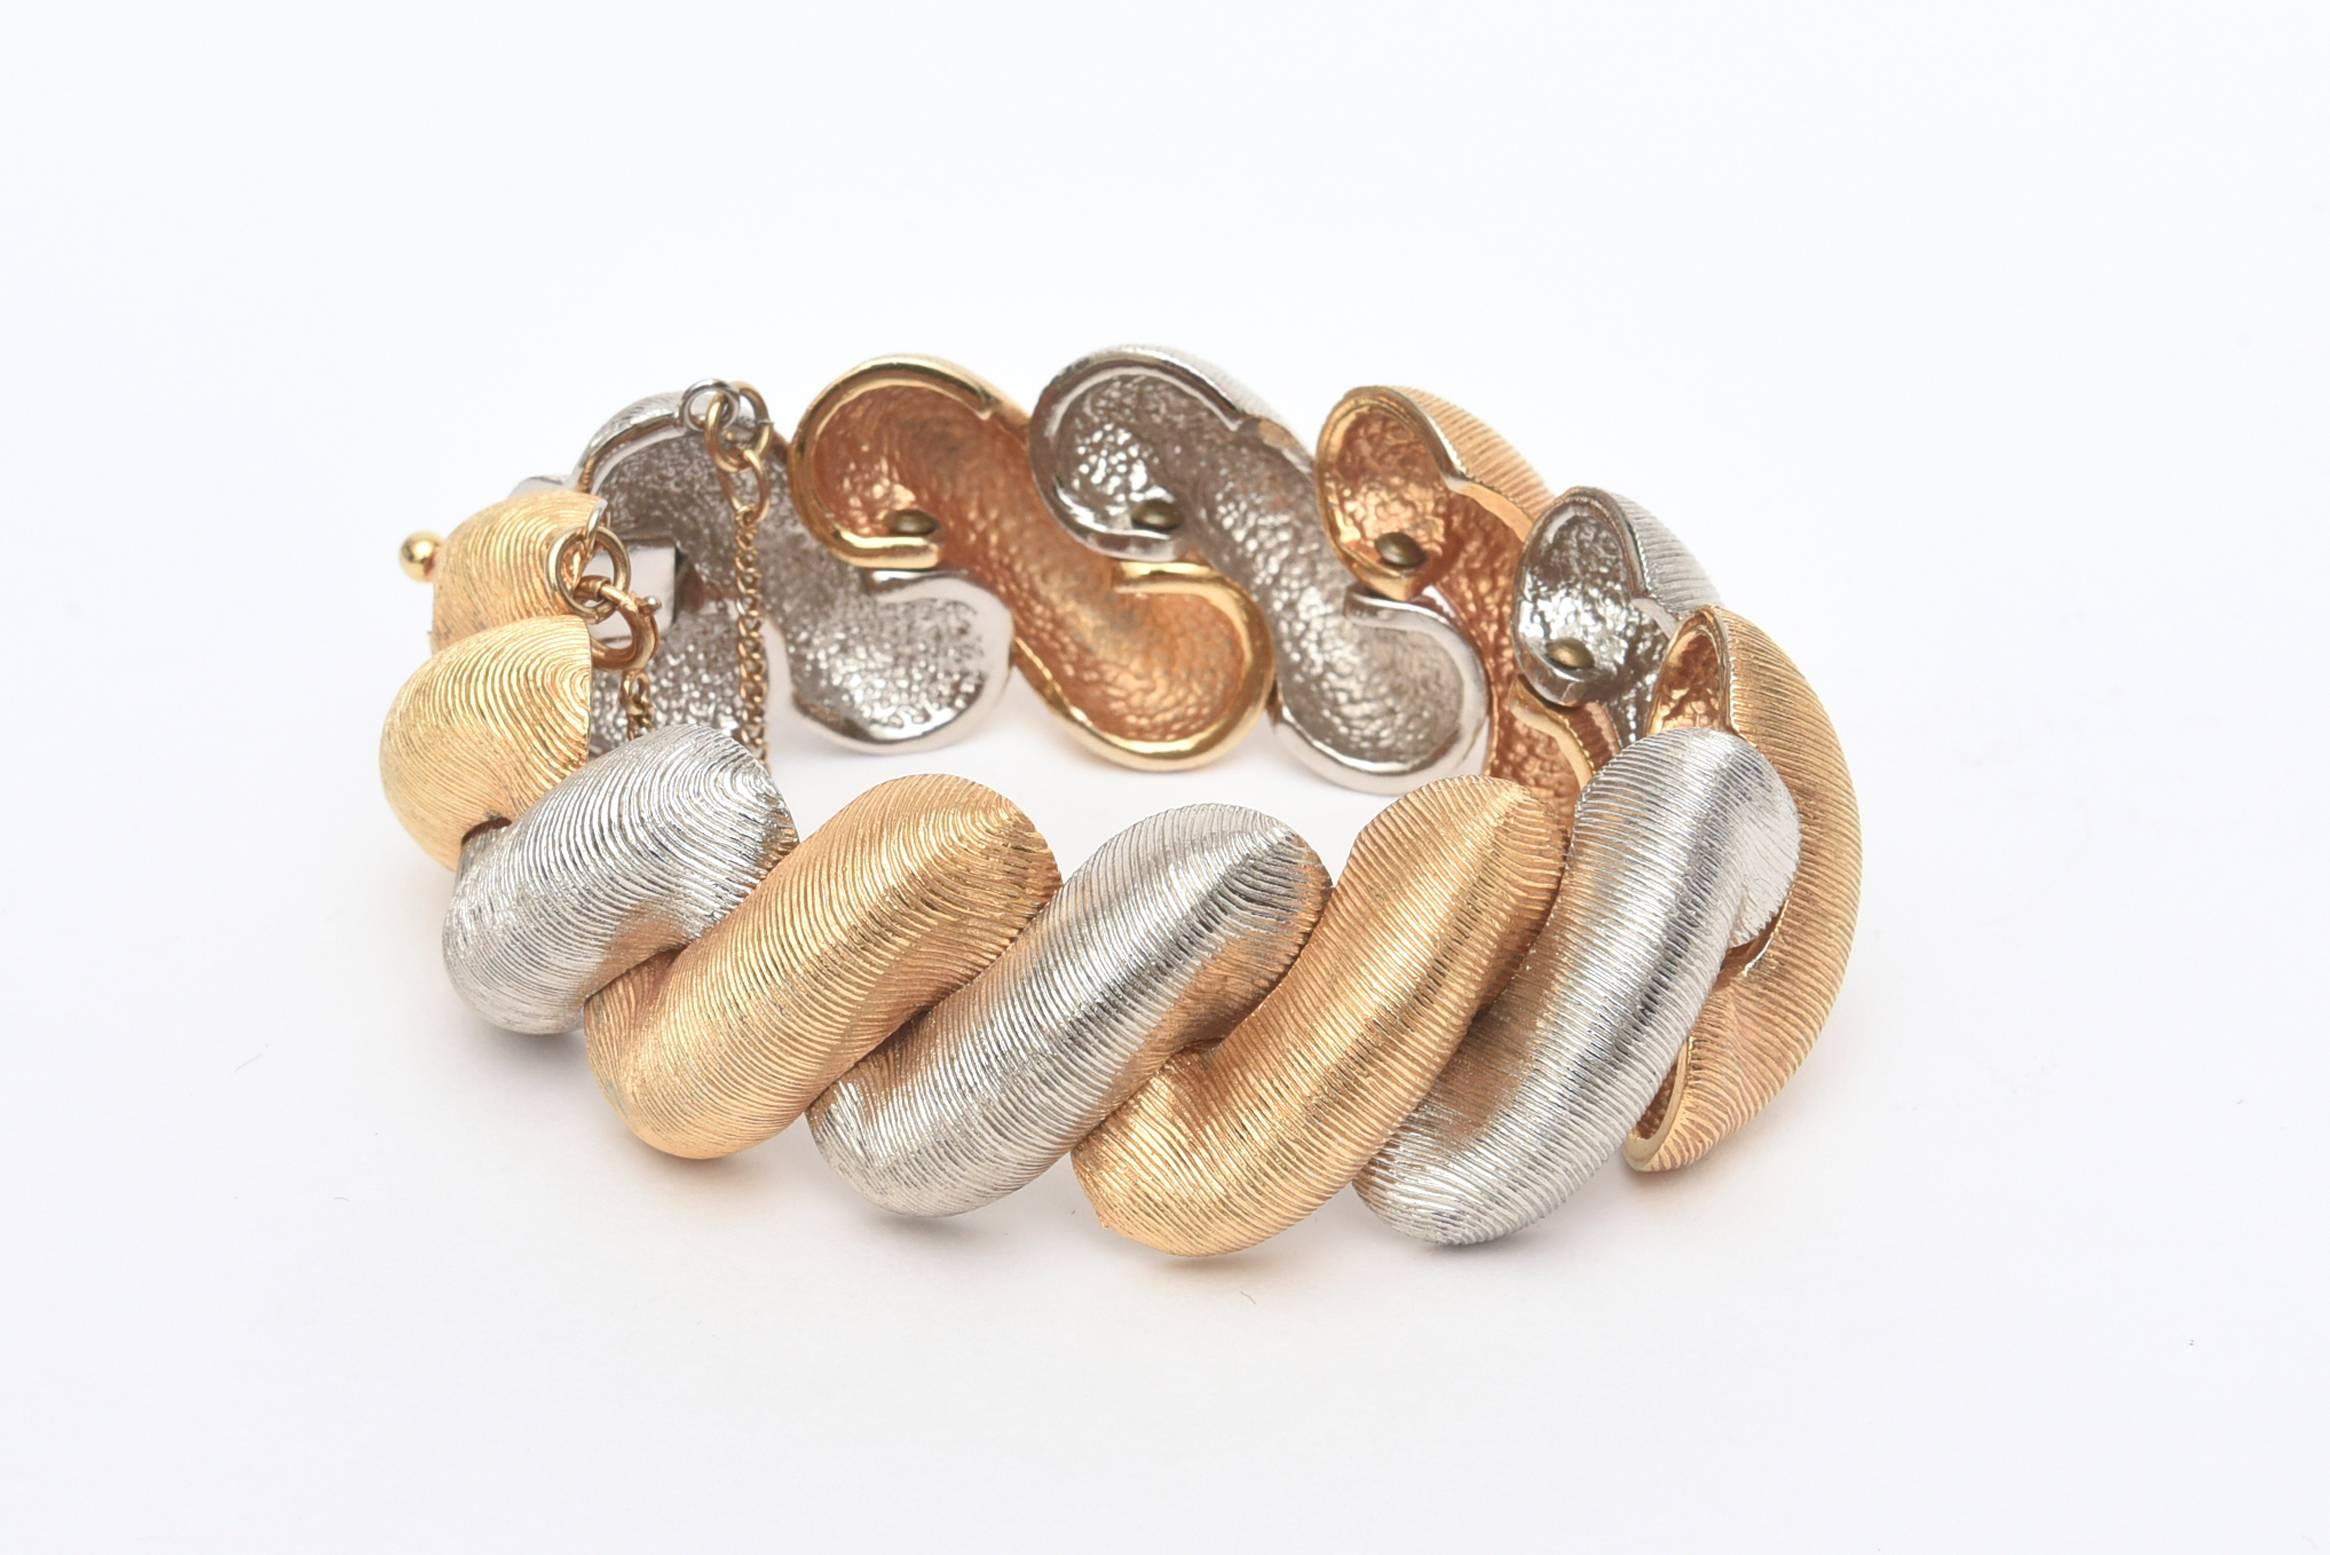 This stunning period bracelet looks authentic and real by Castlecliff. It is finely lined with a brushed satin finish on the metals. Has a modern elegance to it. Gold plated and silver metal, but looks like real gold and sterling silver. This is